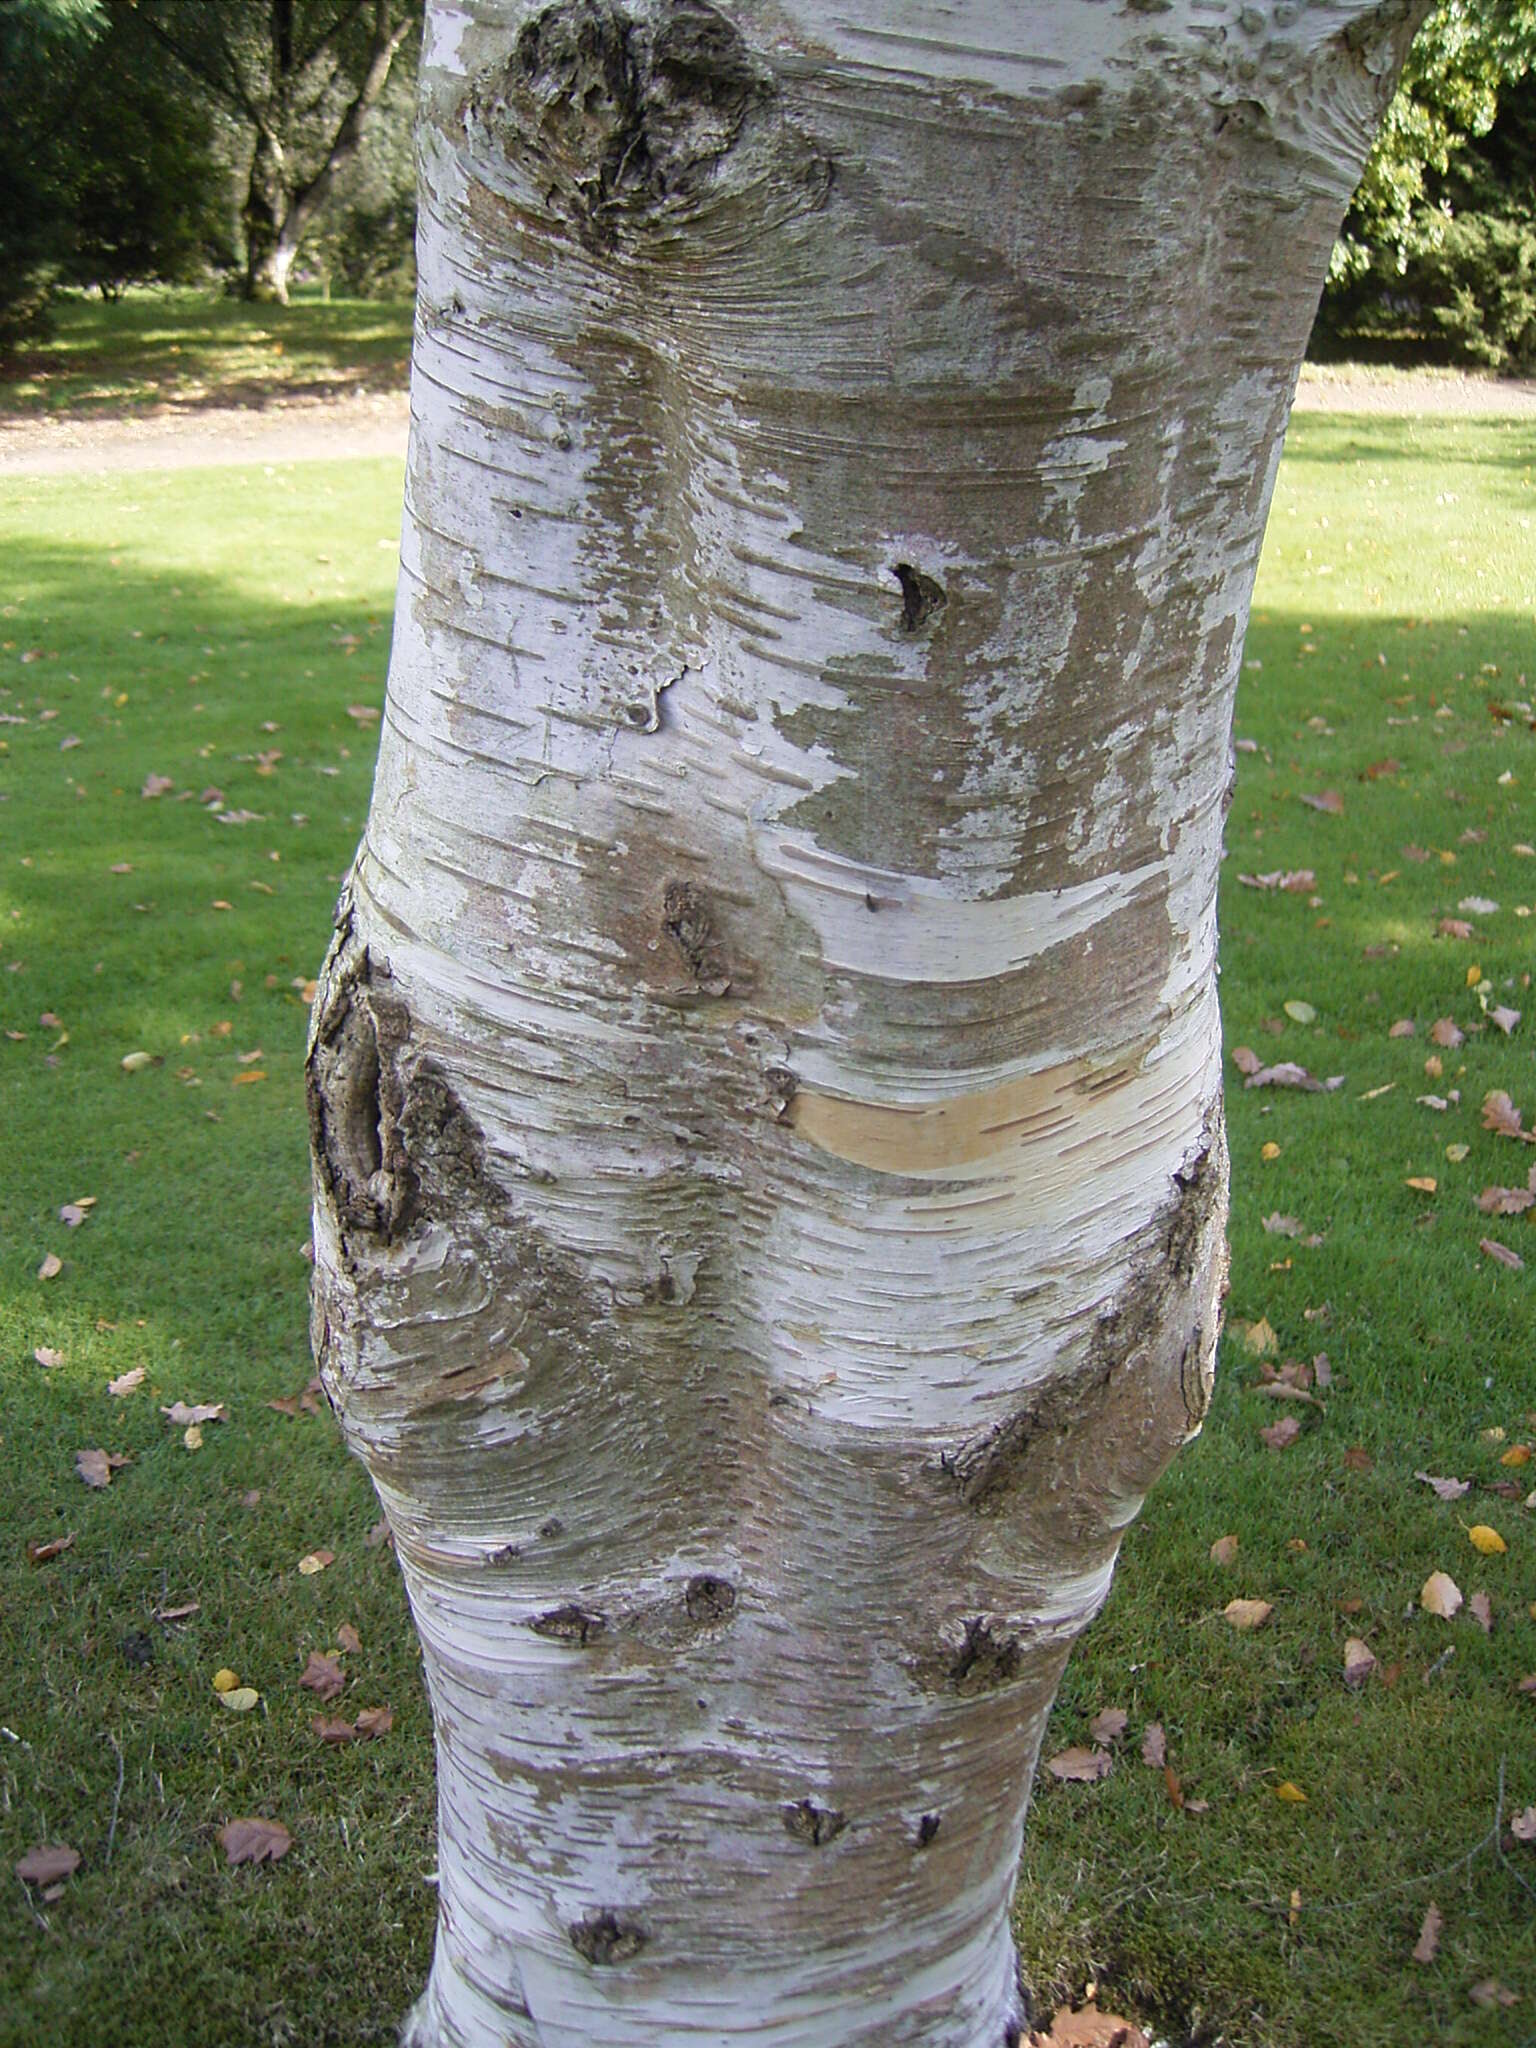 Image of Chinese red birch